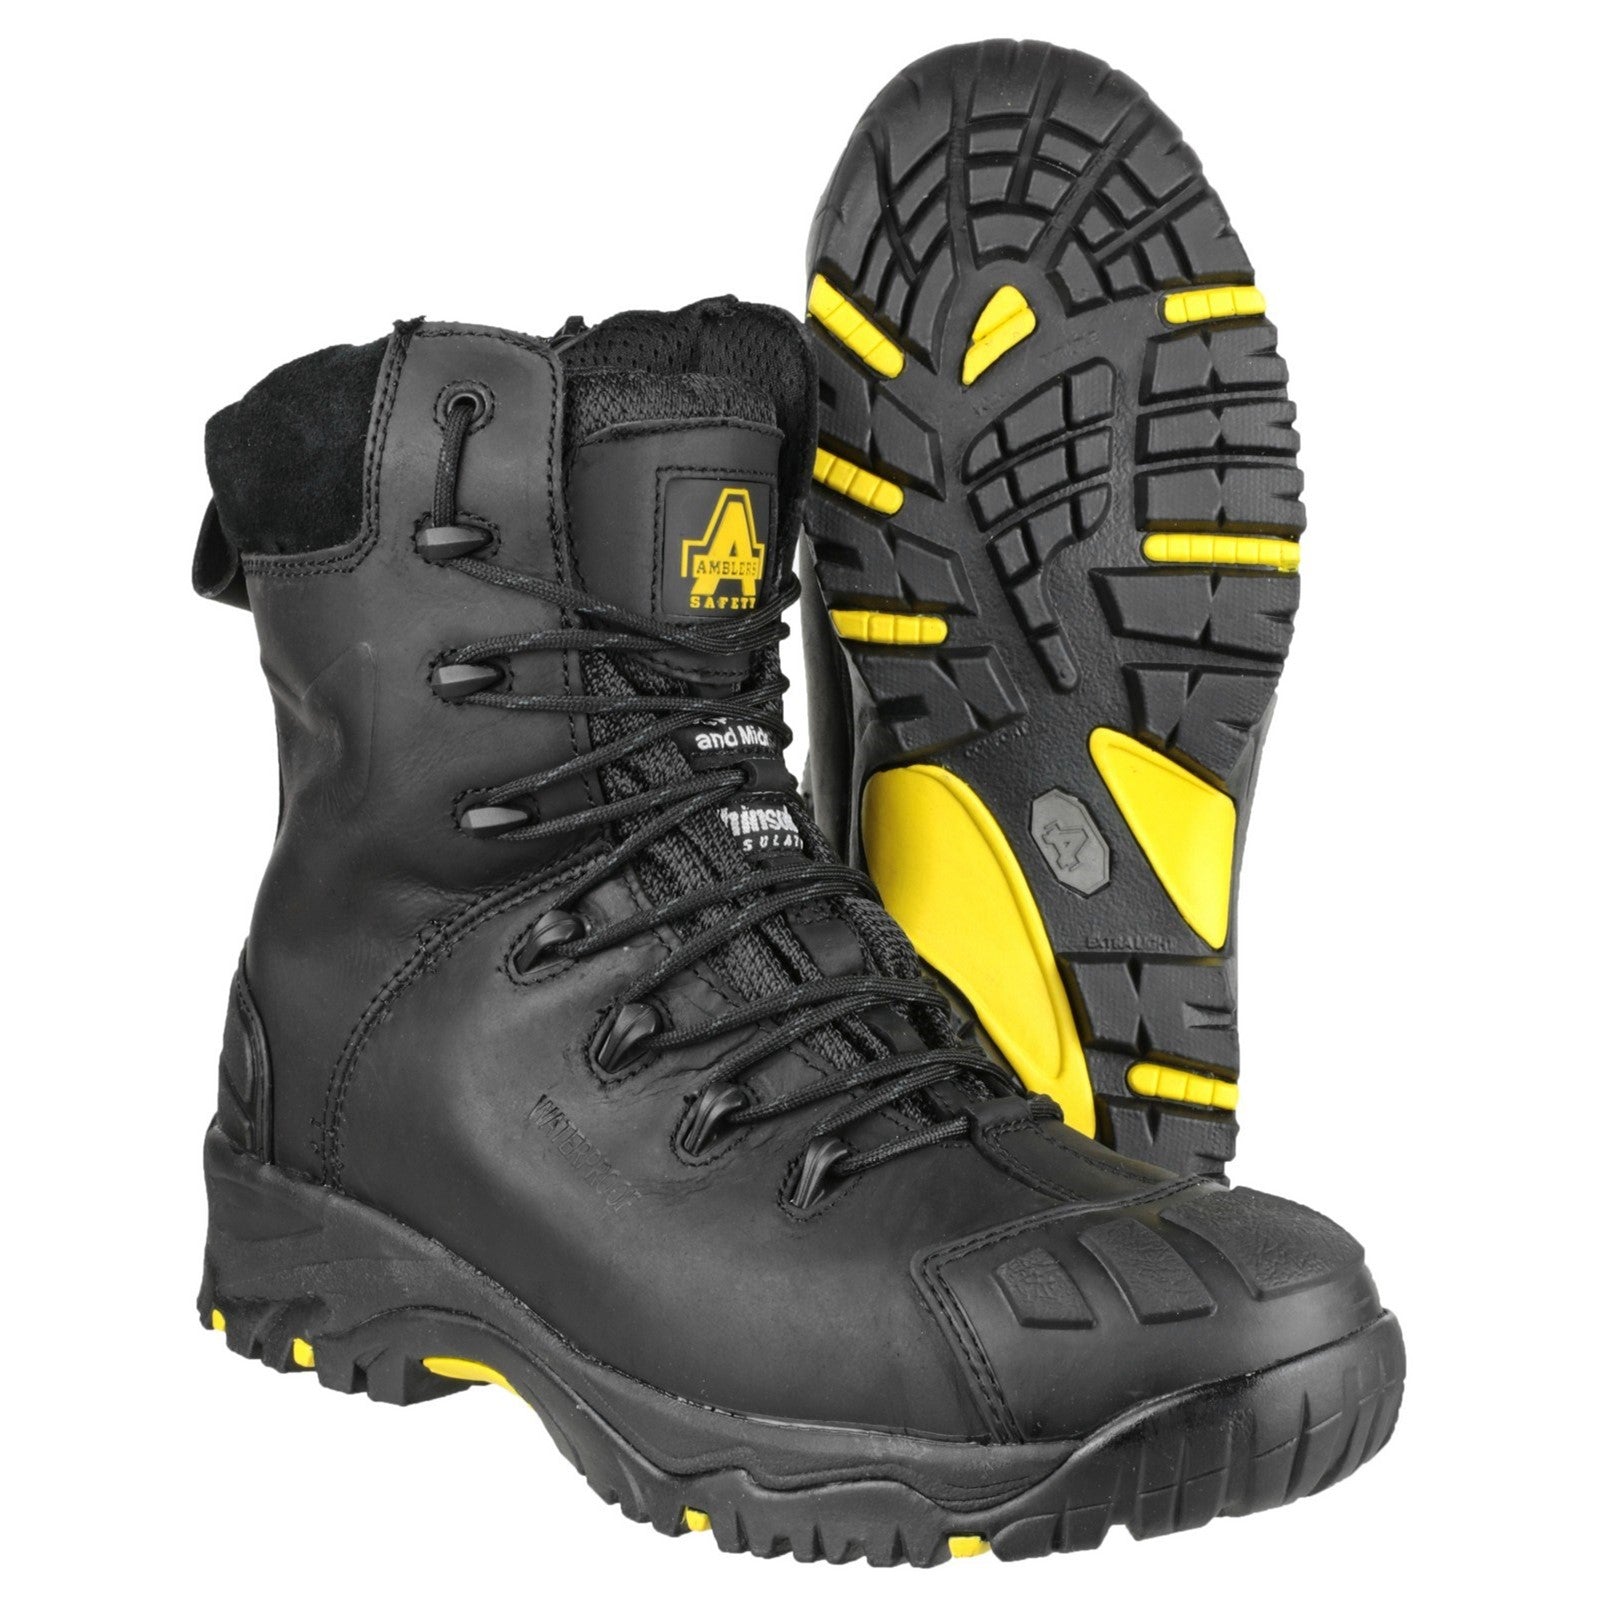 Amblers FS999 Hi Leg Composite Safety Boot With Side Zip